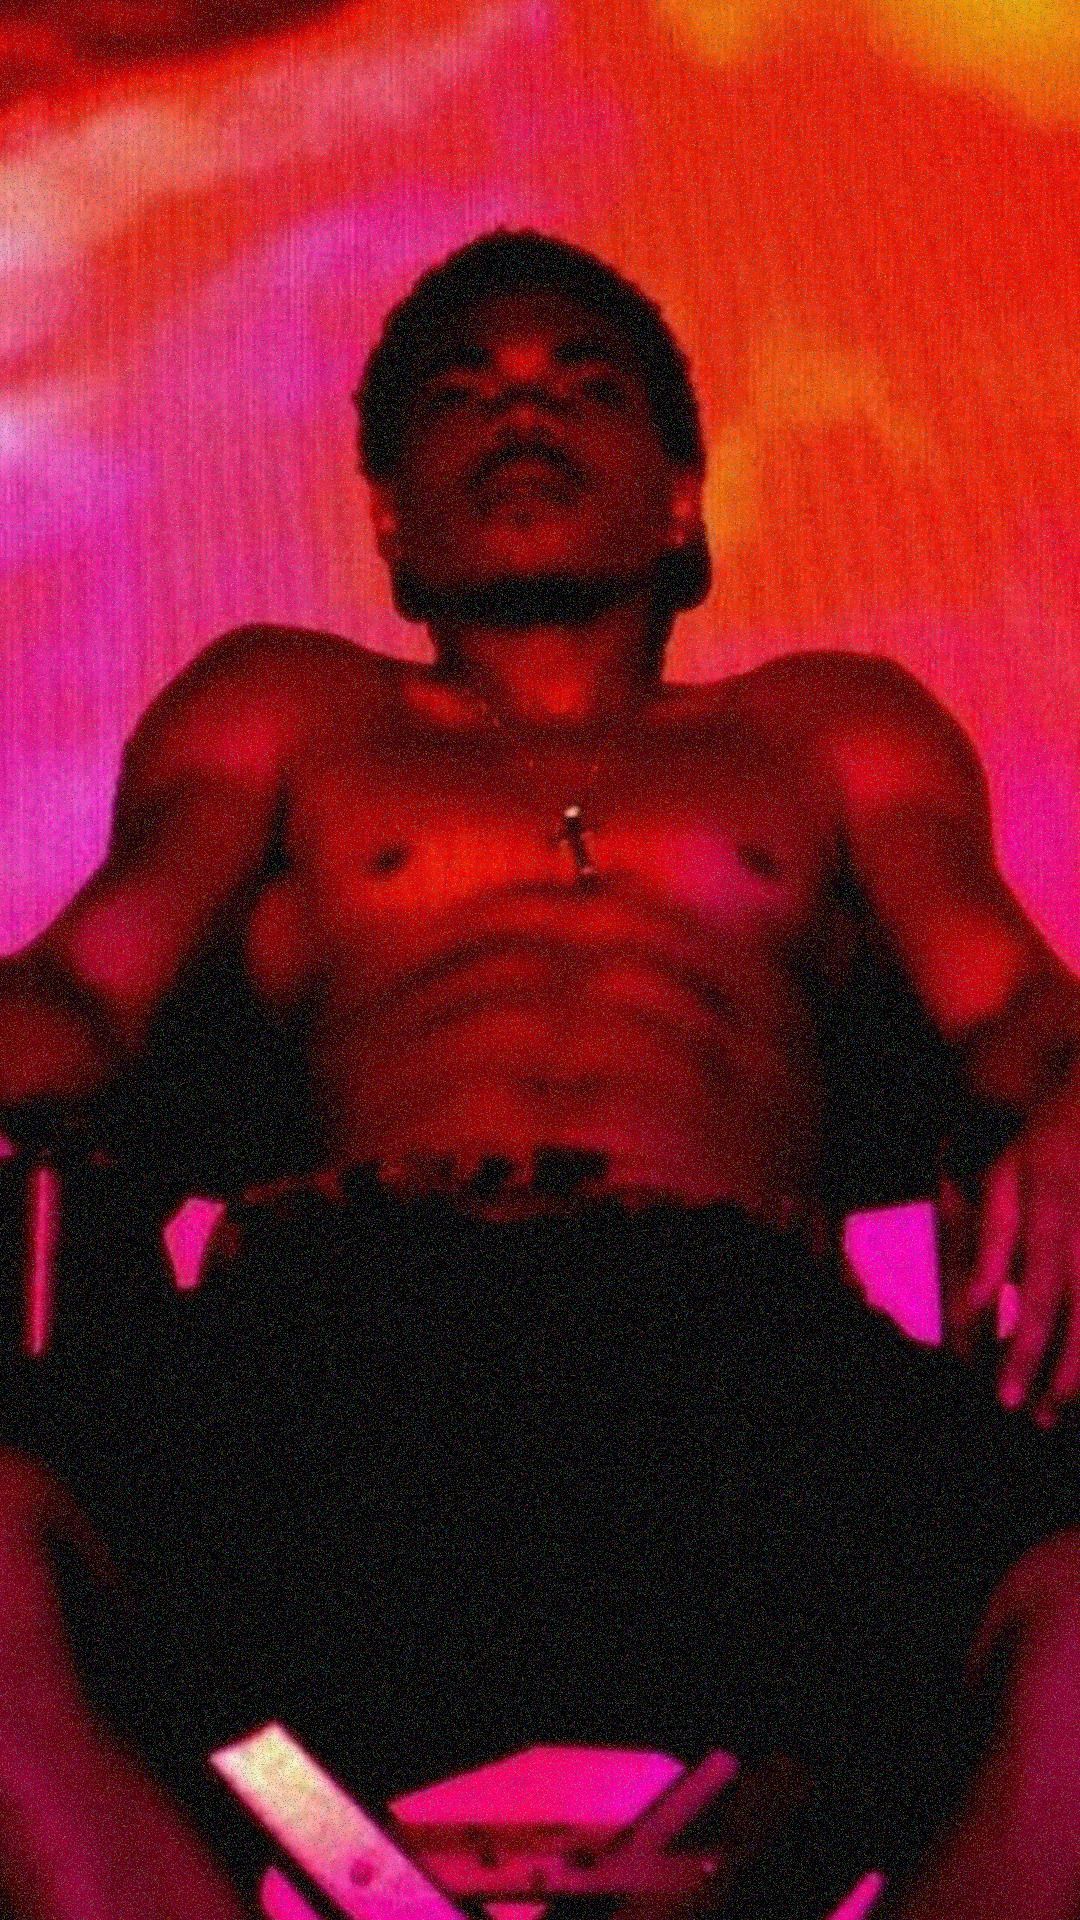 A man sitting in the chair with his shirt off - Chance the Rapper